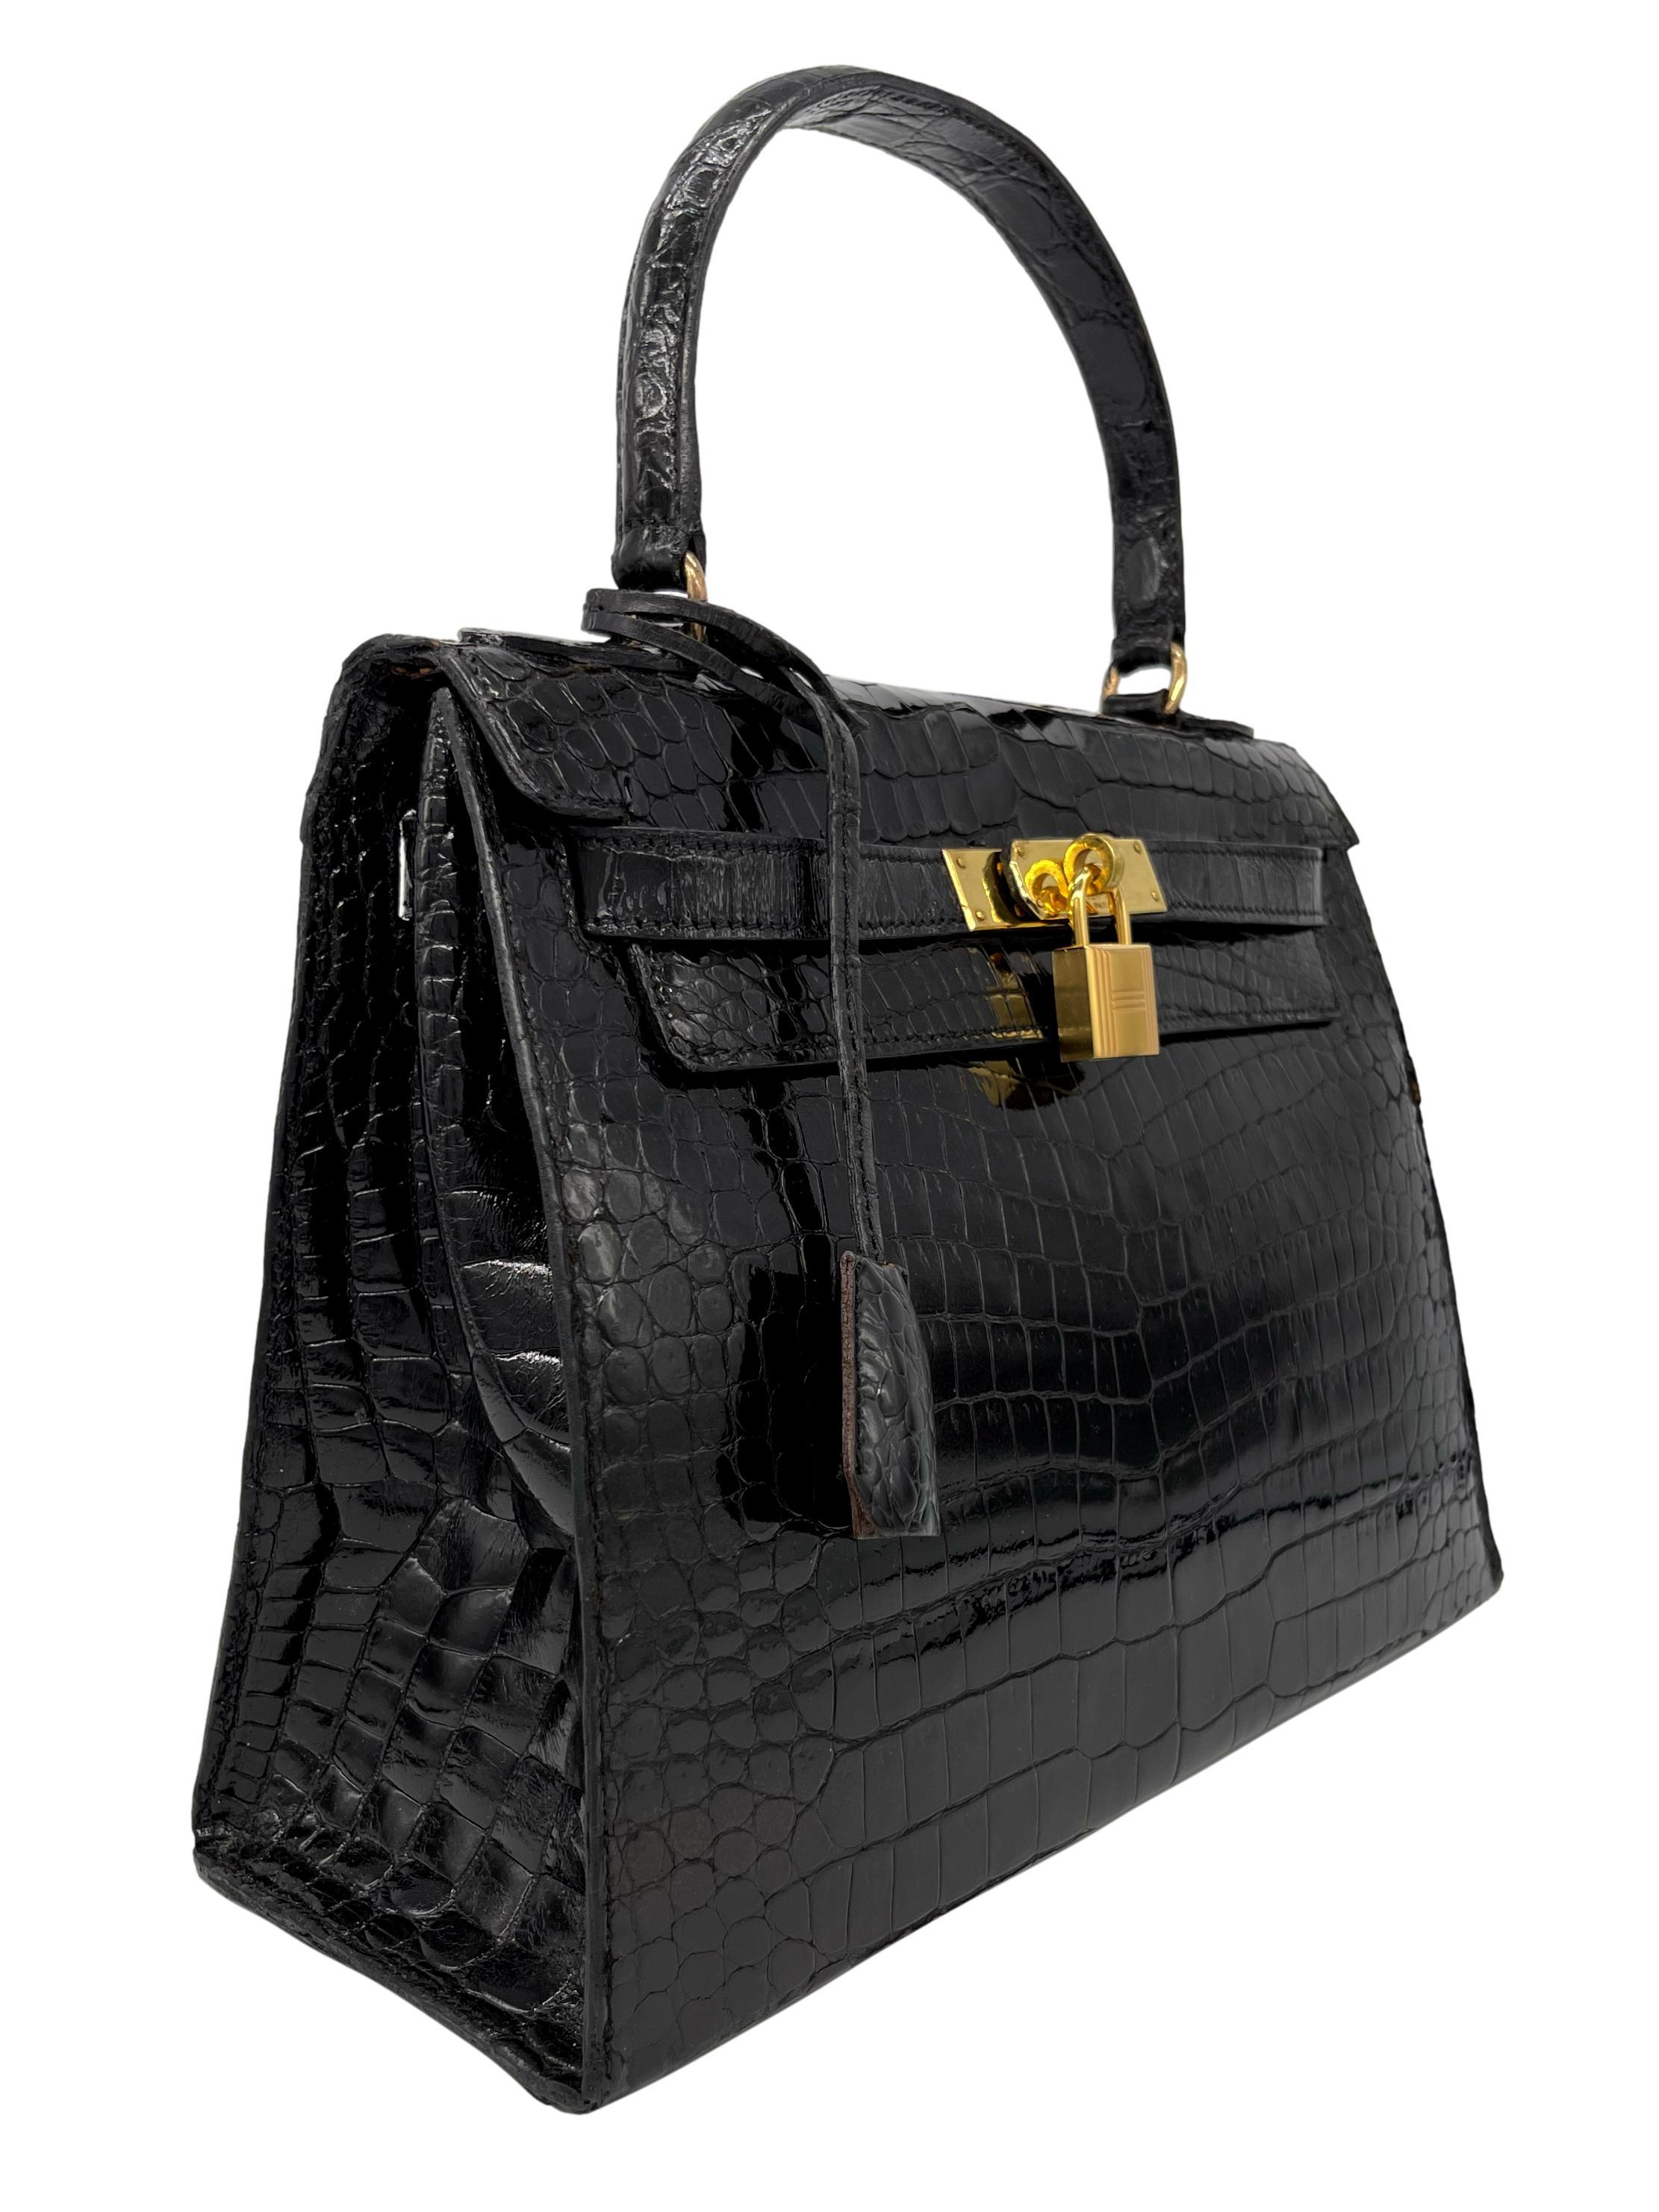 Hermès Rare Vintage Shiny Black Porosus Crocodile Kelly Handbag with Gold Hardware 28cm, 1940. Originally introduced in the early 1930's as the Sac à dépêches bag, the Kelly became world renowned after Grace Kelly, Princess of Monaco appeared on the